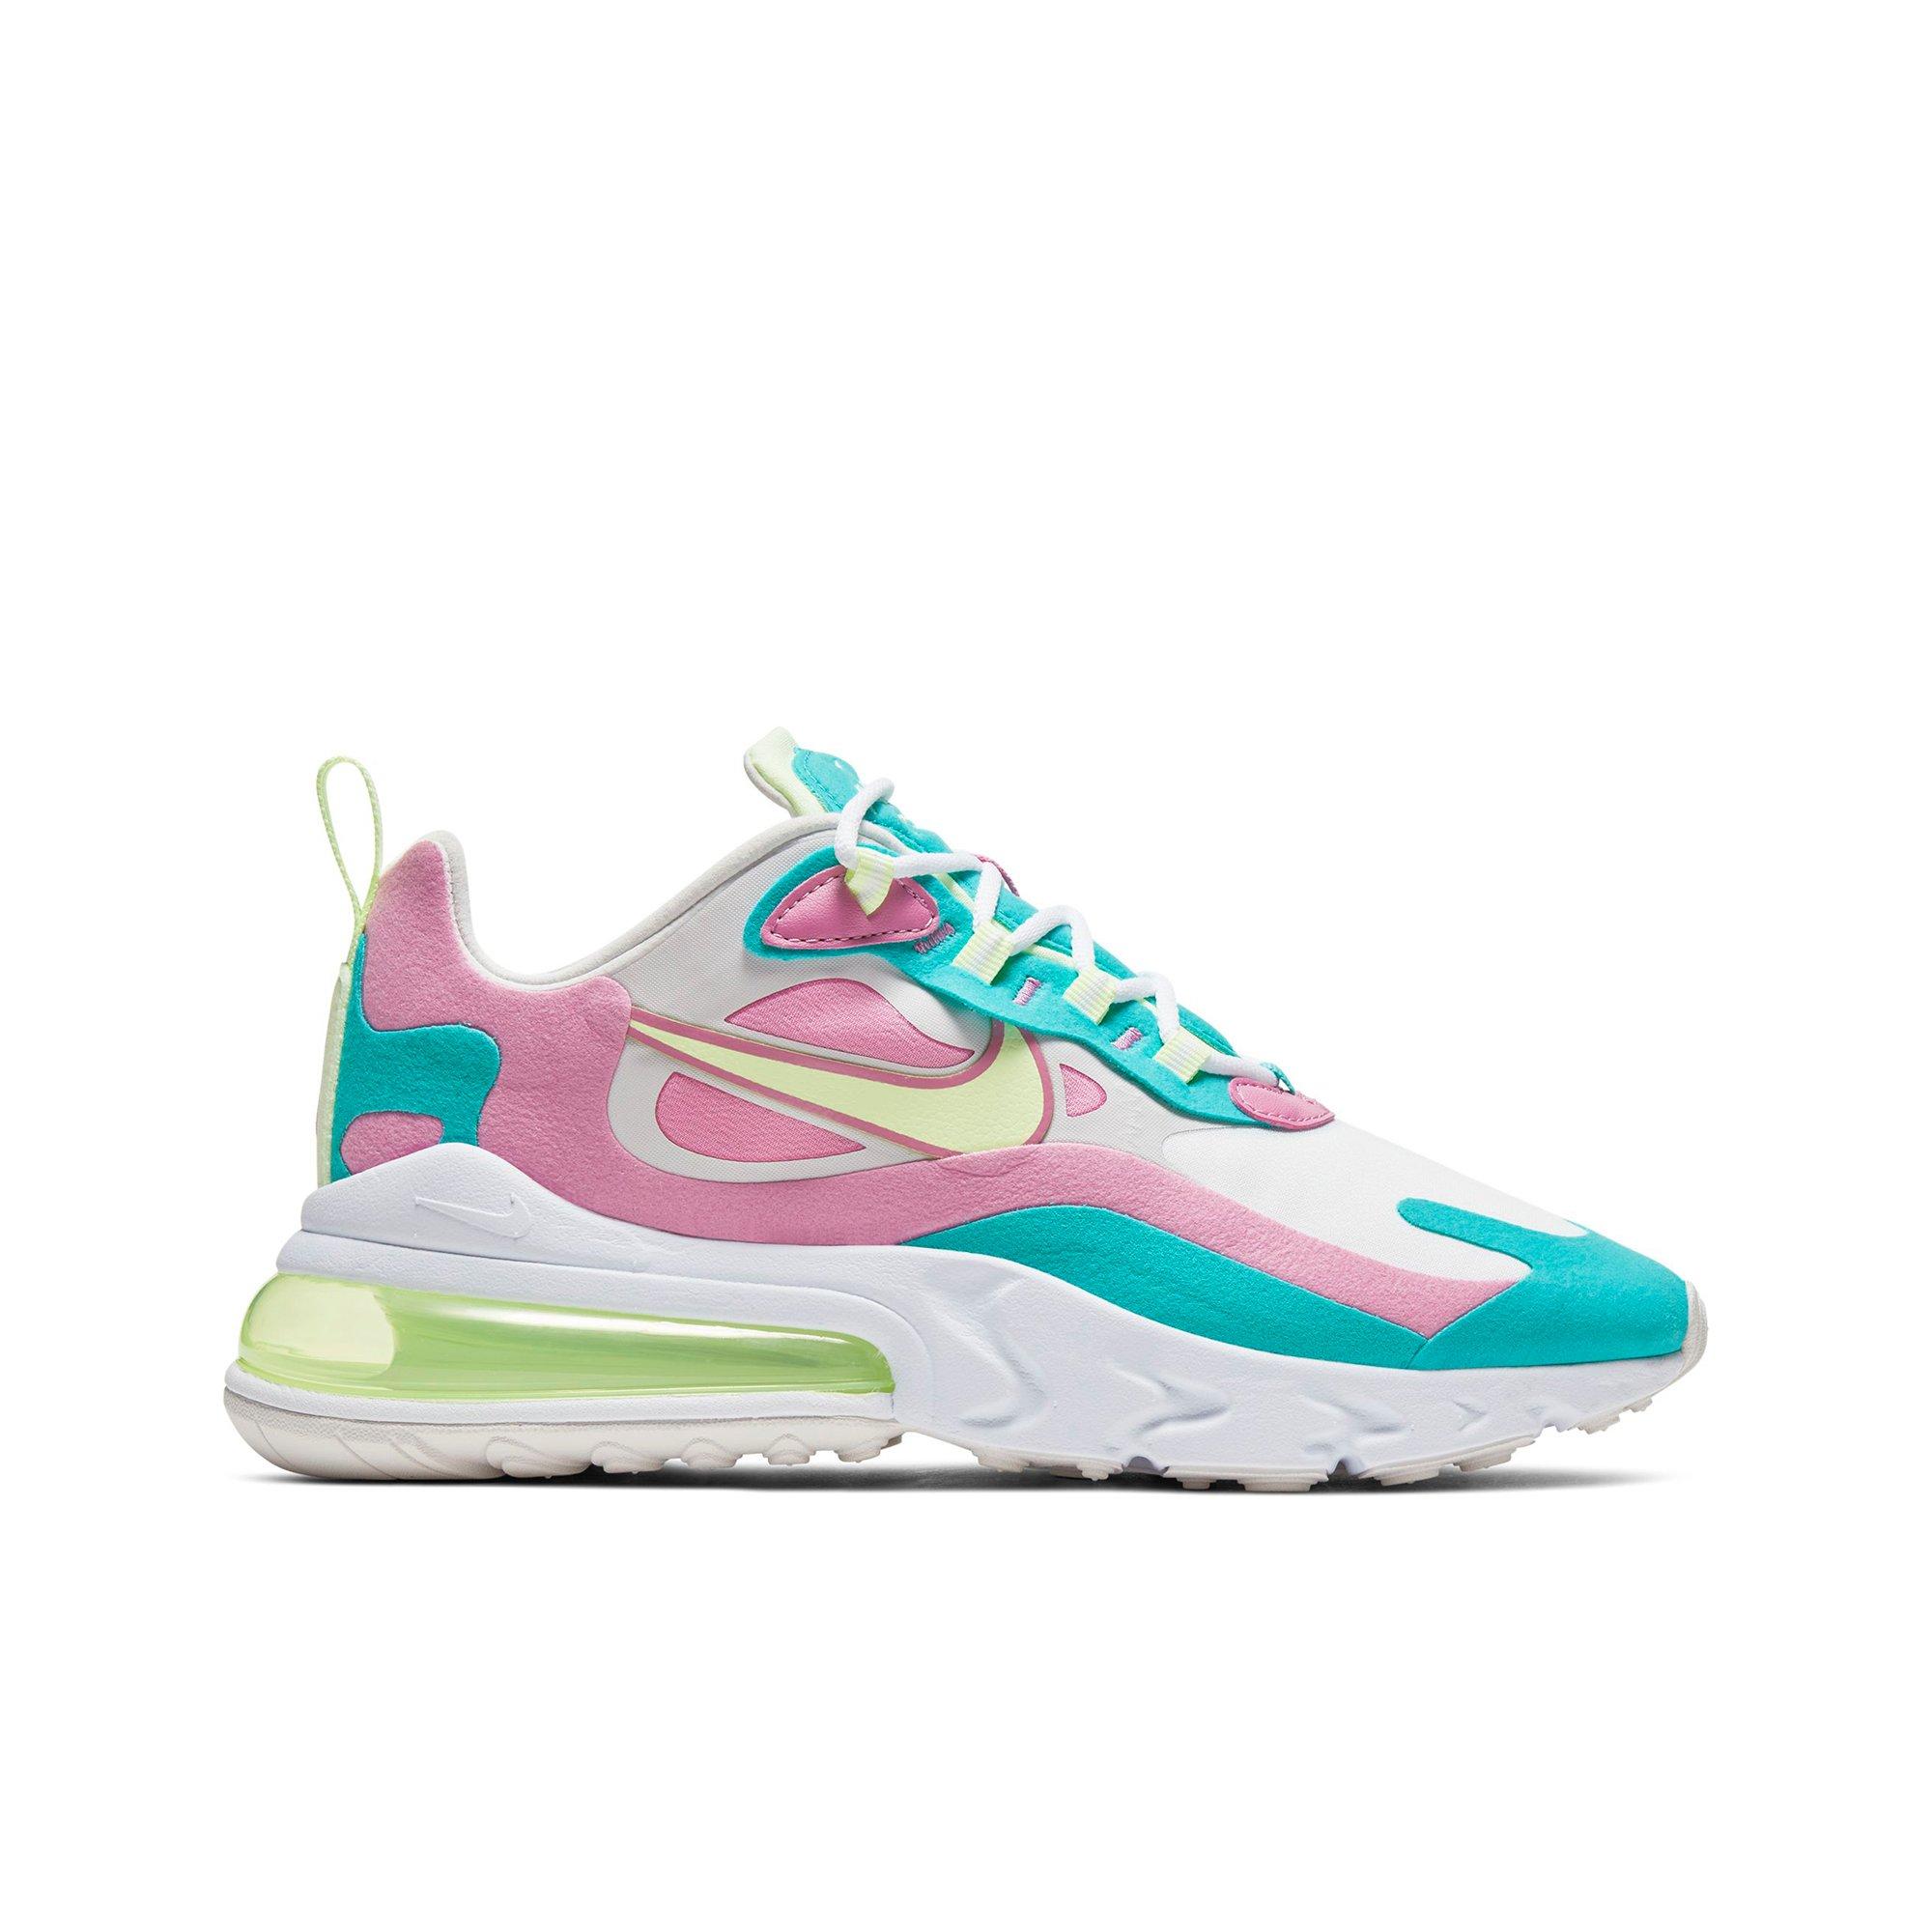 white teal and pink air max